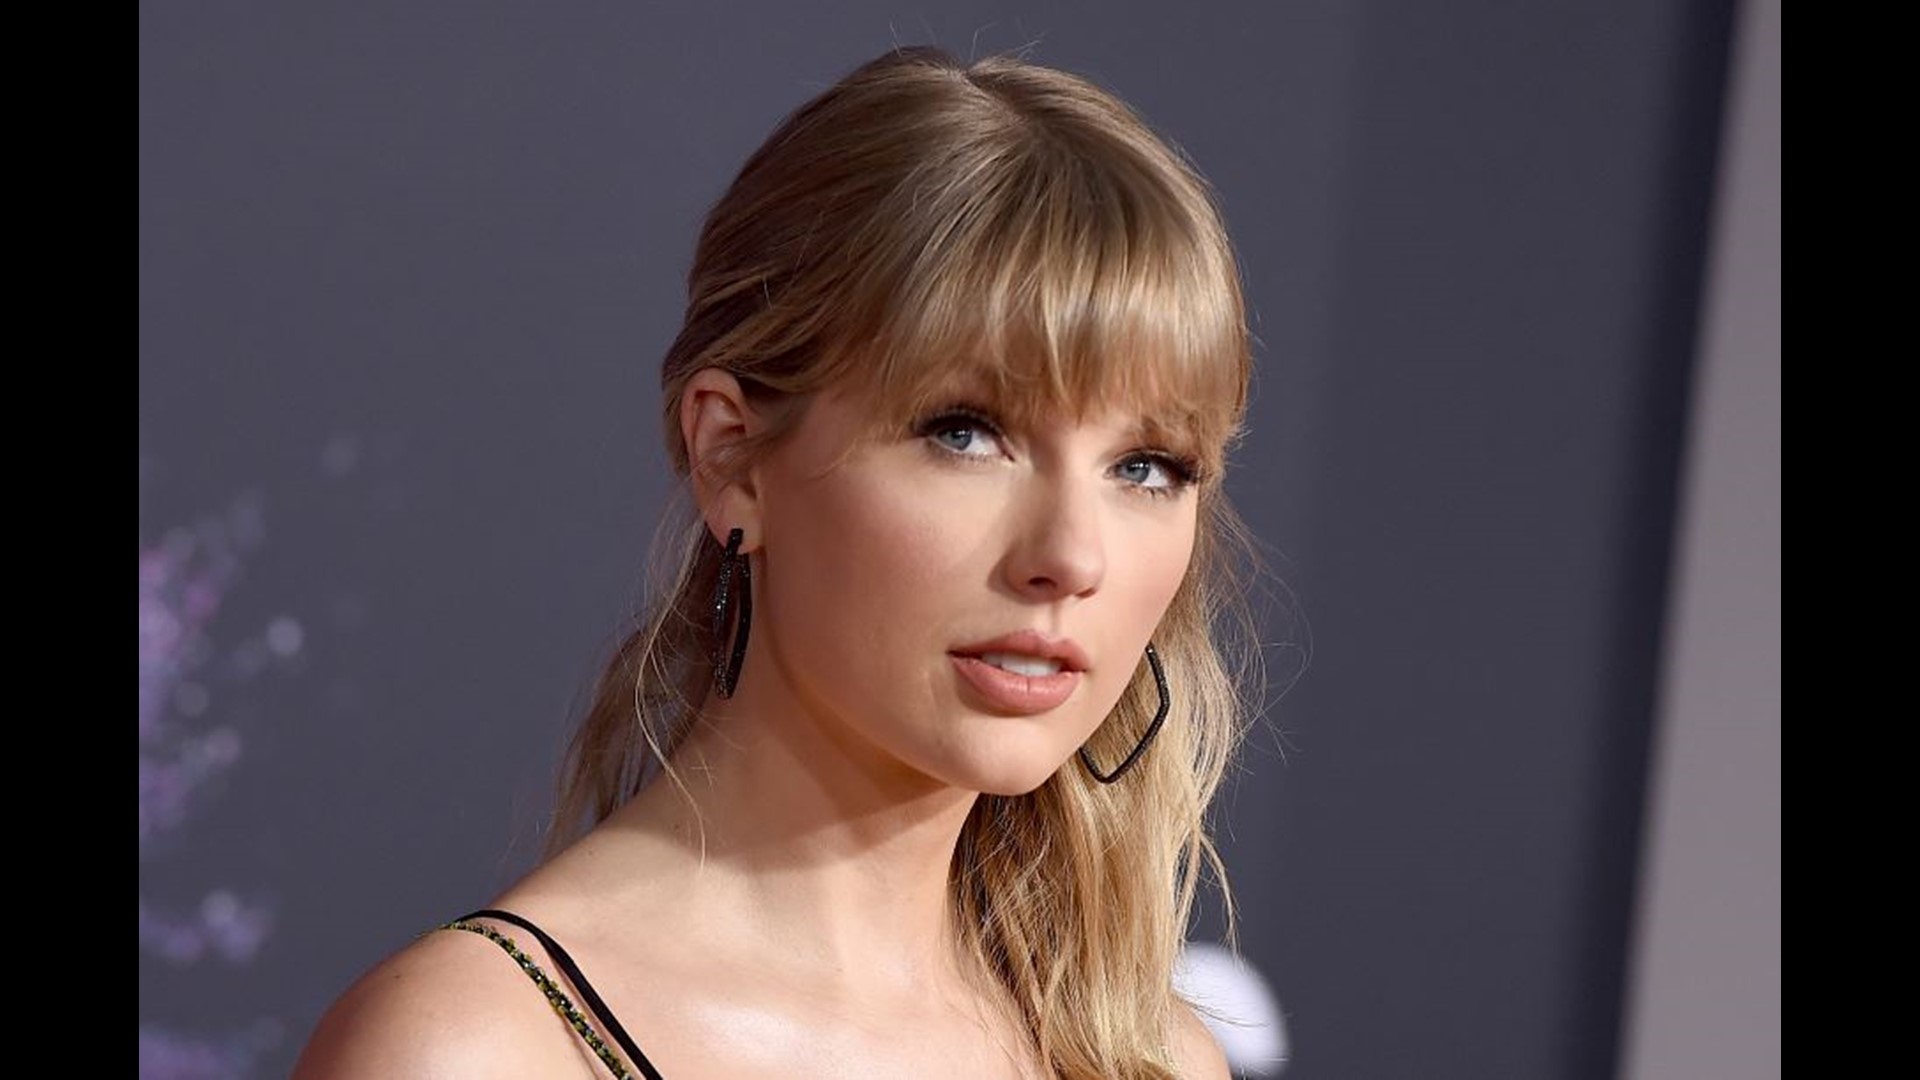 Taylor Swift has canceled all shows, appearances for 2020